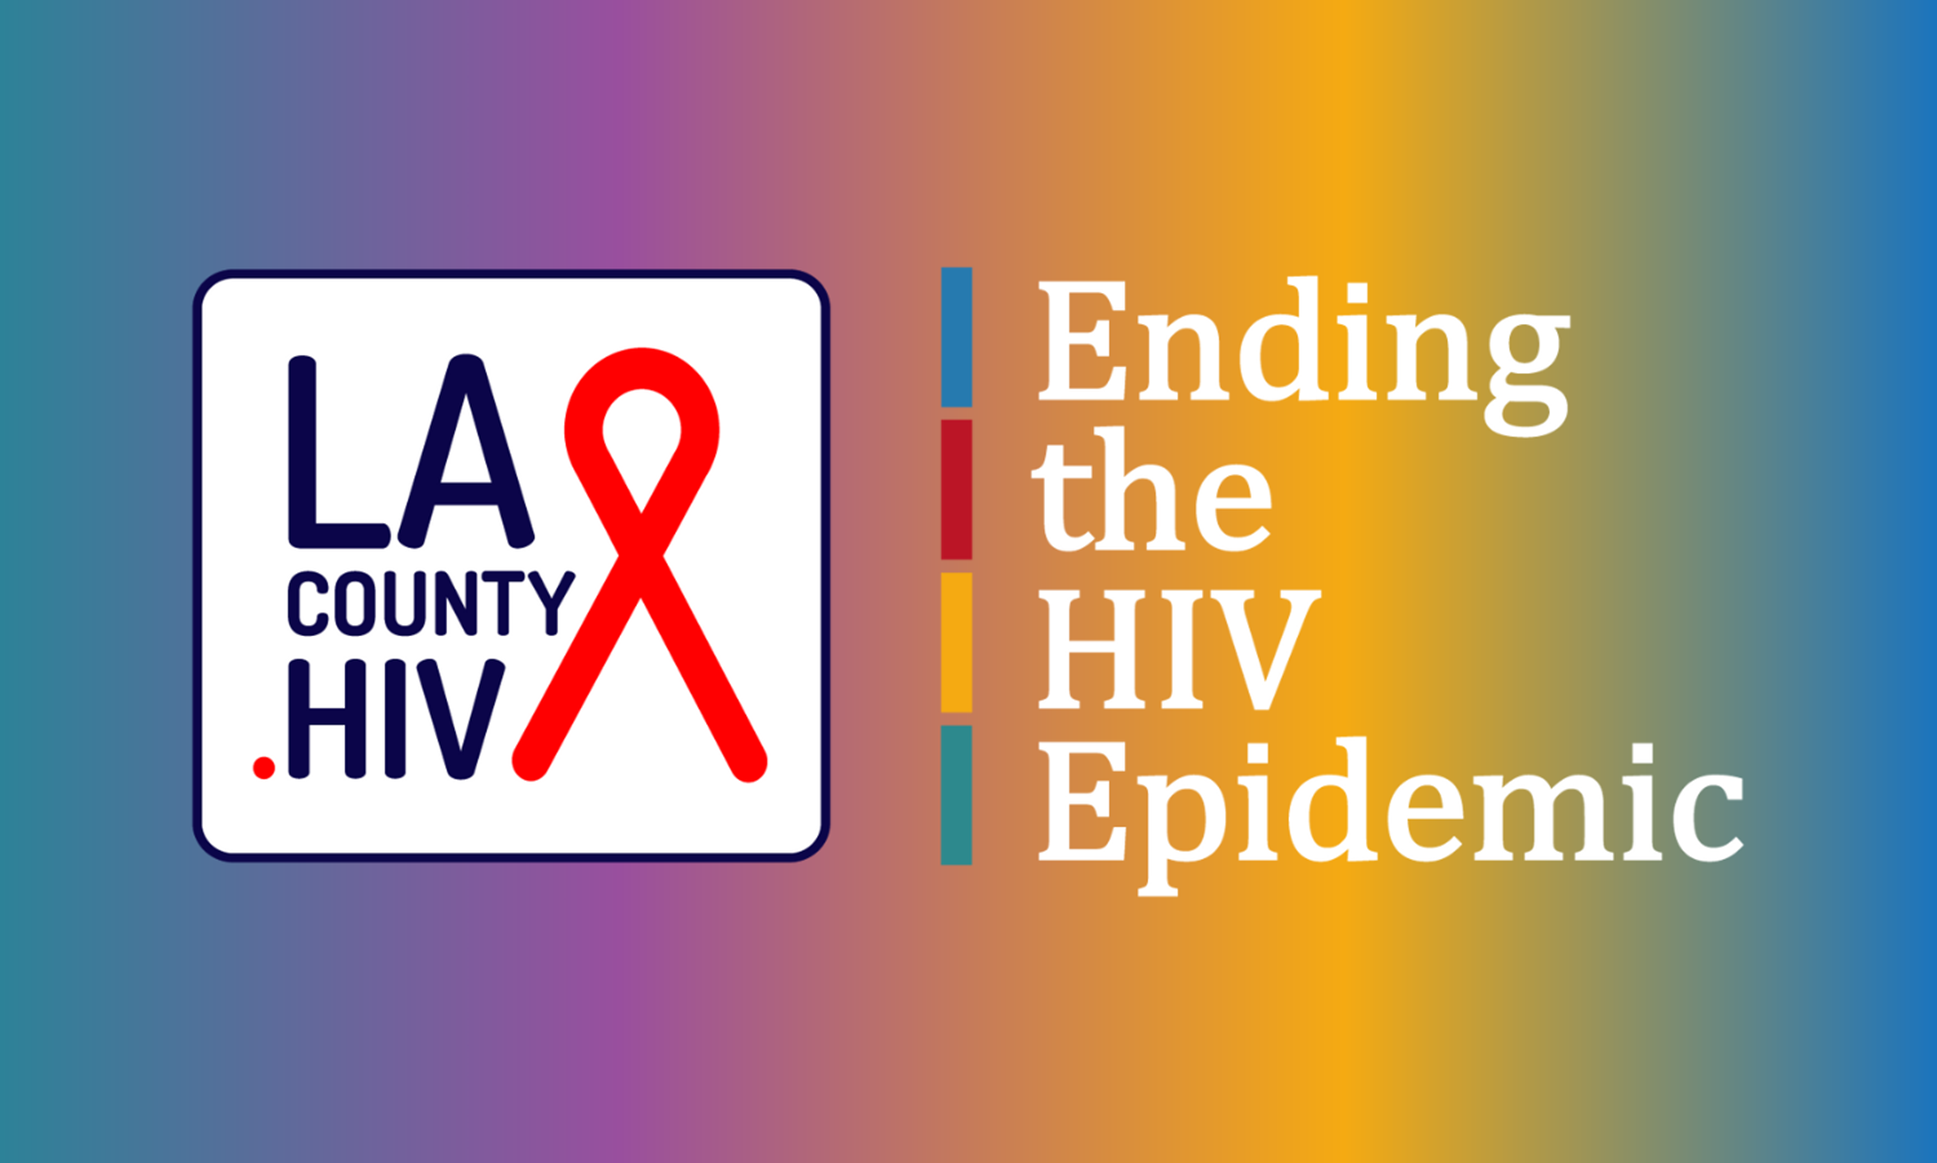 Ending the HIV Epidemic in Los Angeles County